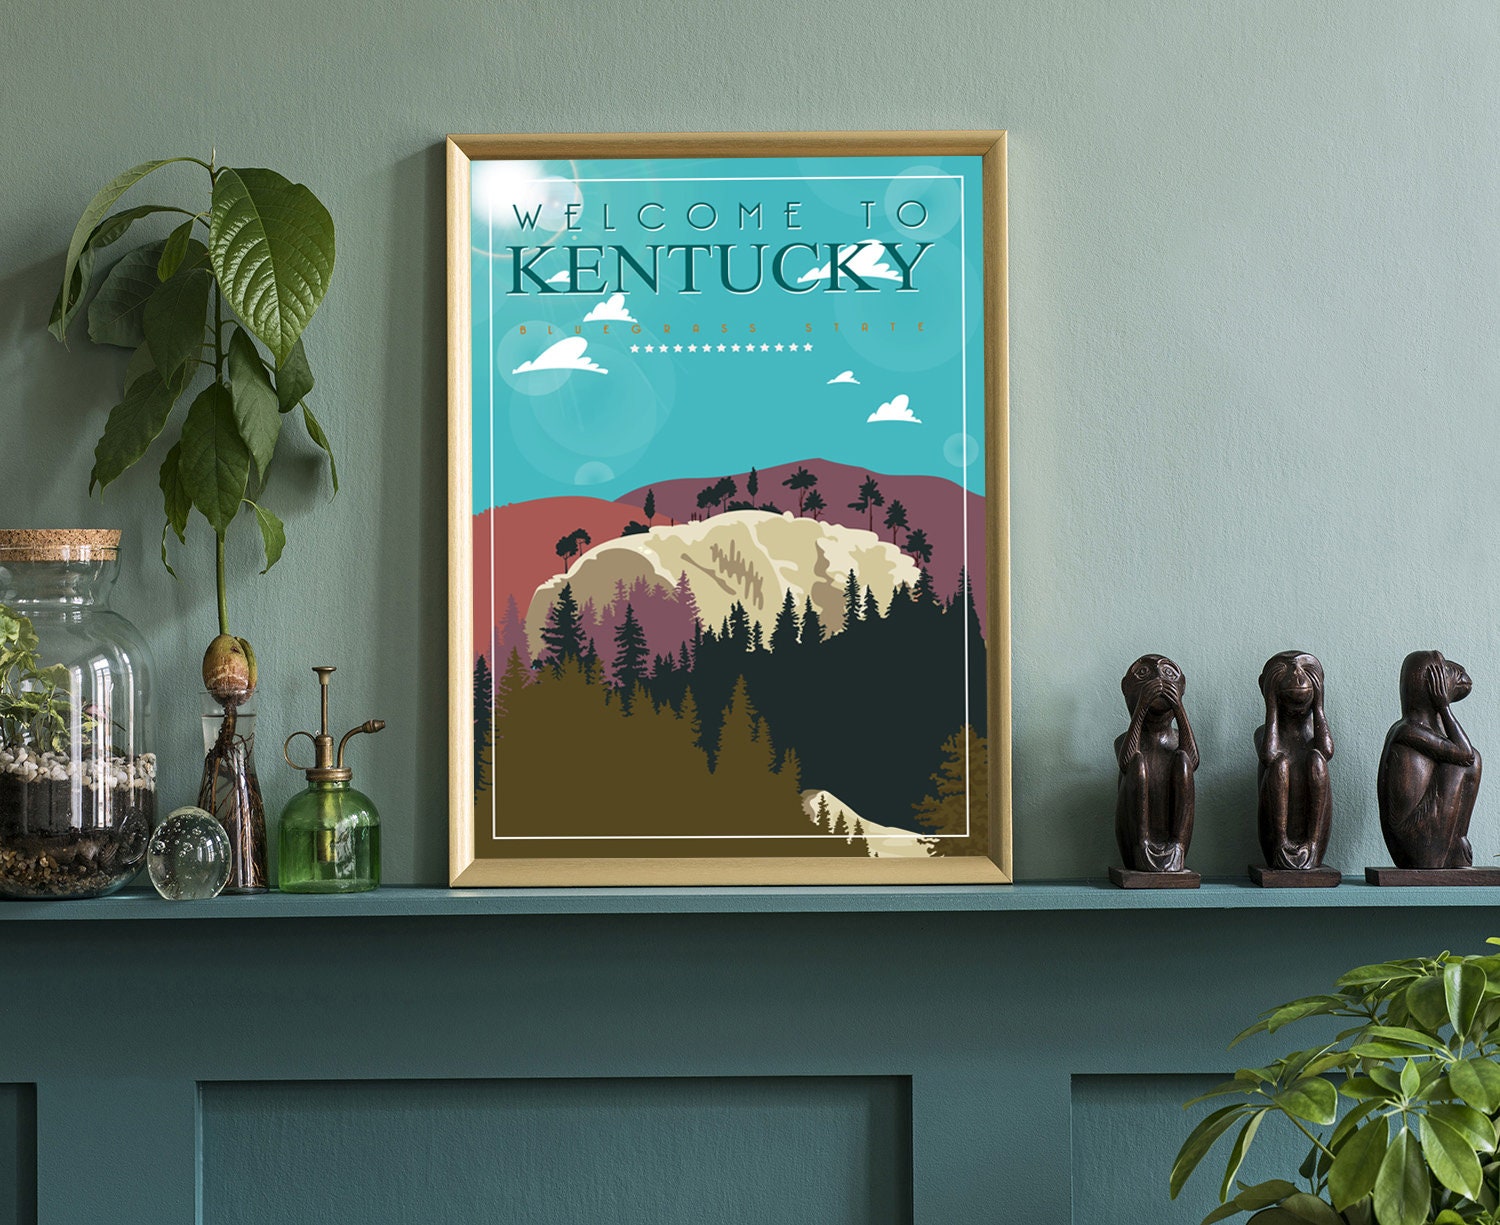 Kentucky Vintage Rustic Poster Print, Retro Style Travel Poster